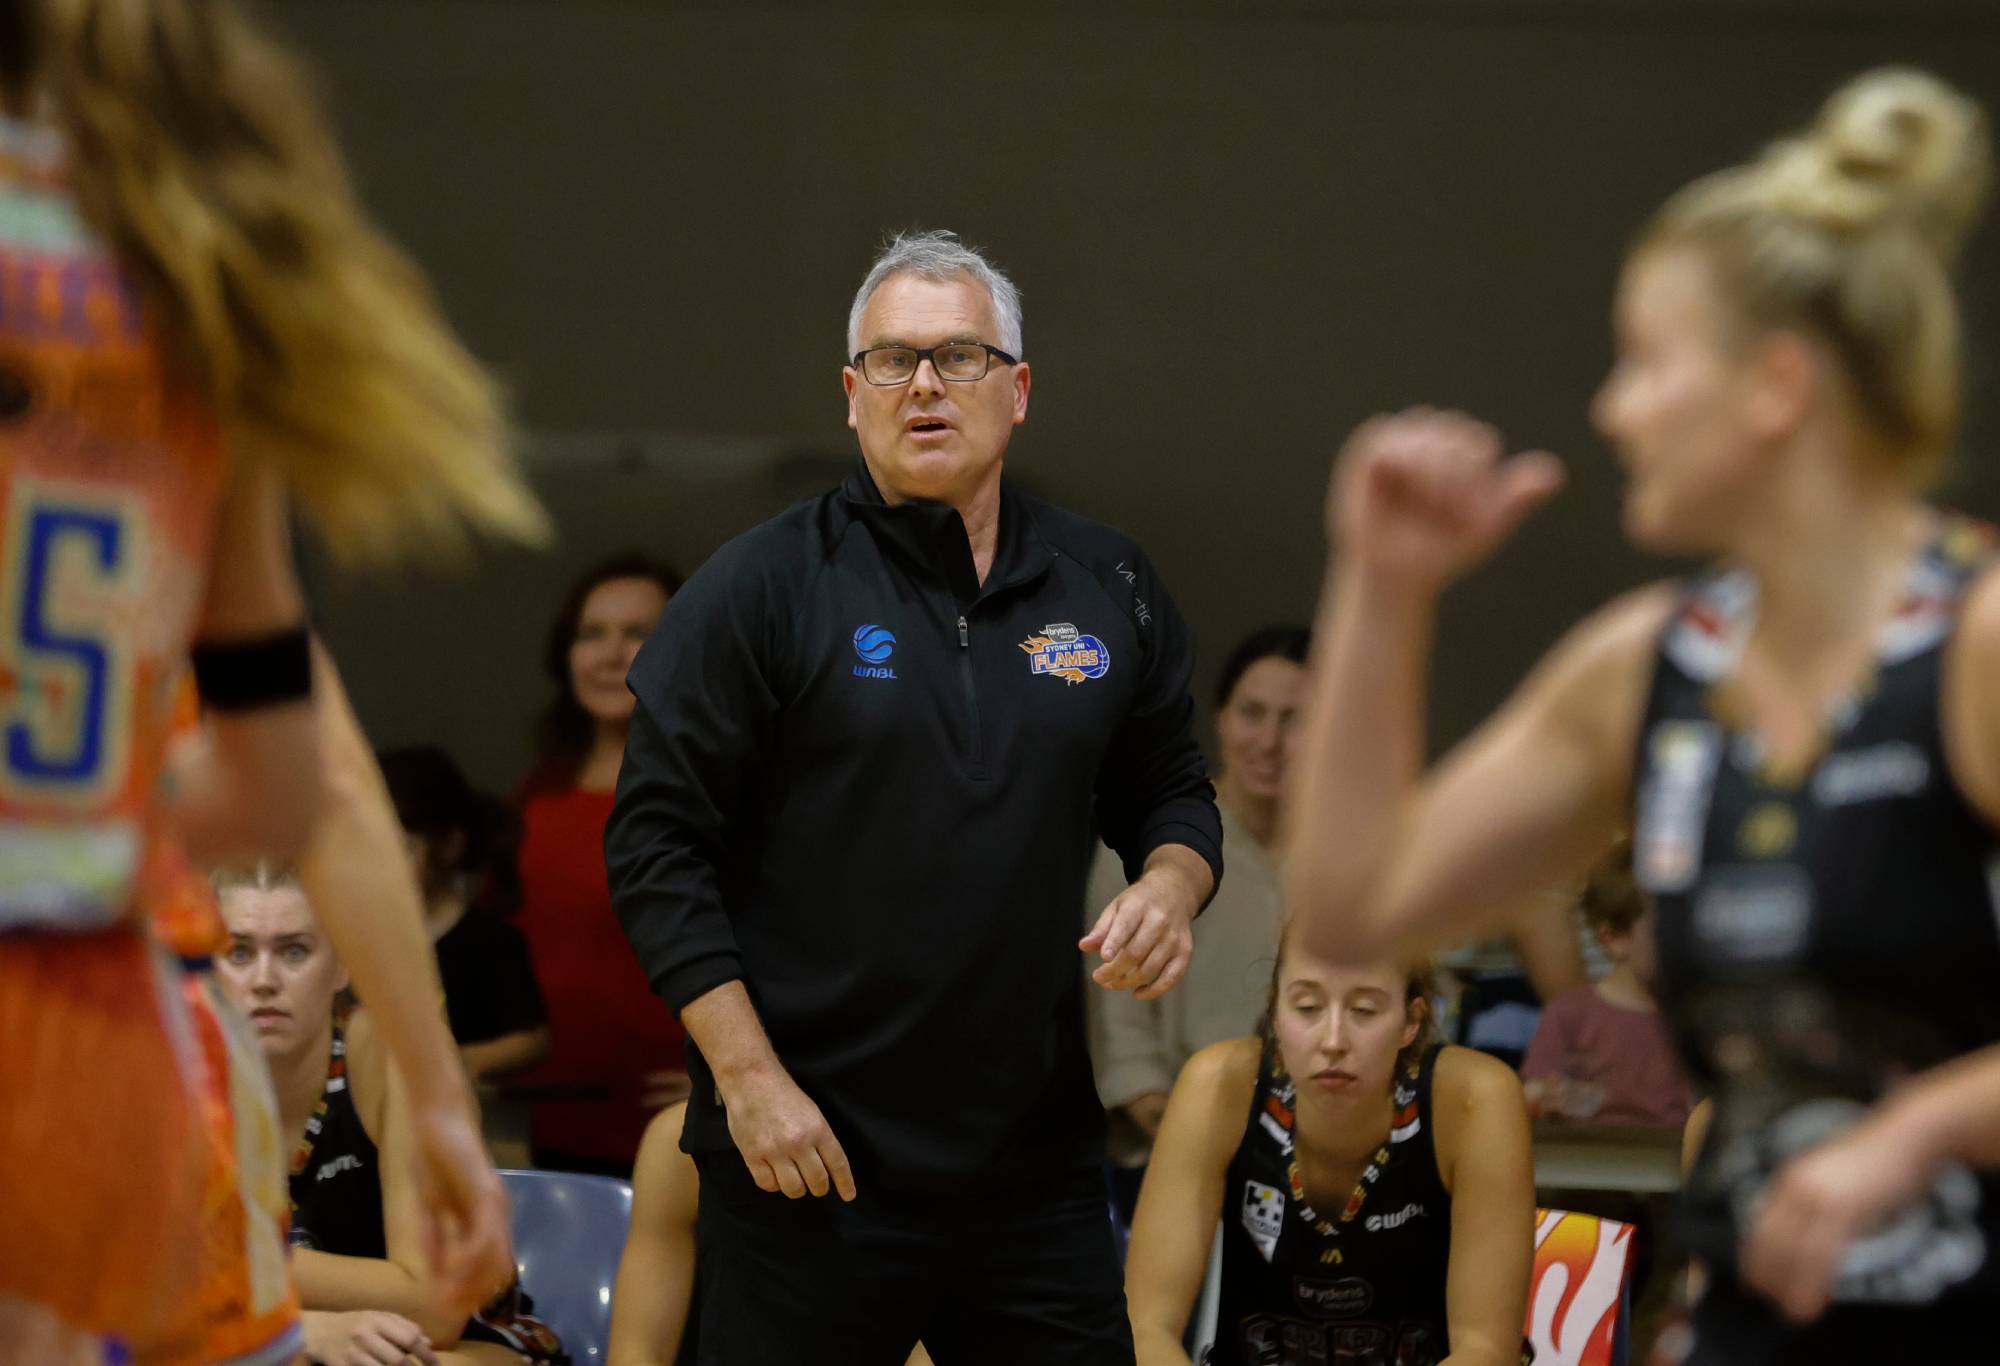 Shane Heal, Head Coach of the Flames looks on during the round 15 WNBL match between Sydney Flames and Bendigo Spirit at Brydens Stadium, on March 20, 2022, in Sydney, Australia. (Photo by Mark Evans/Getty Images)